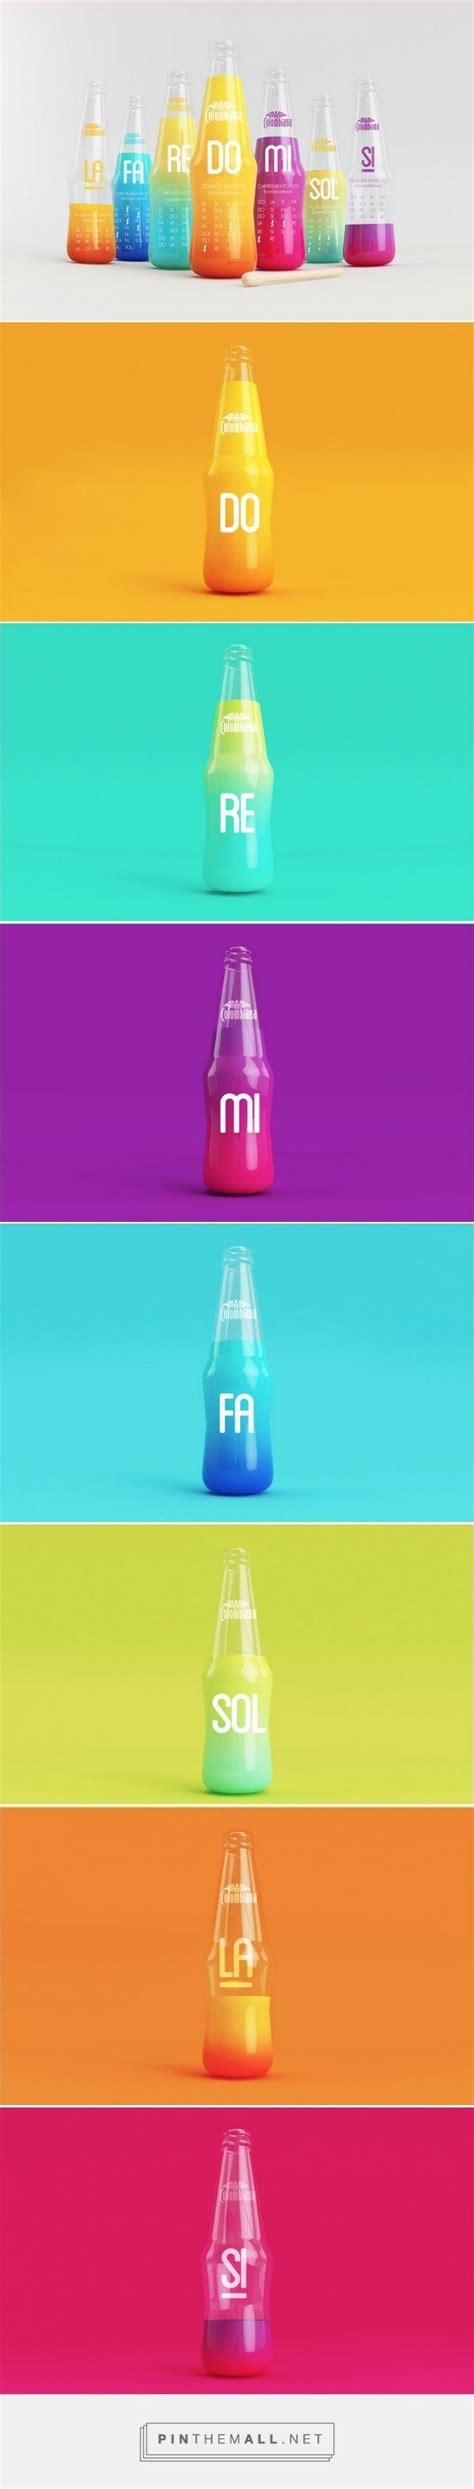 Rhythms (Concept) - Packaging of the World - Creative Package Design Gallery - http://www ...